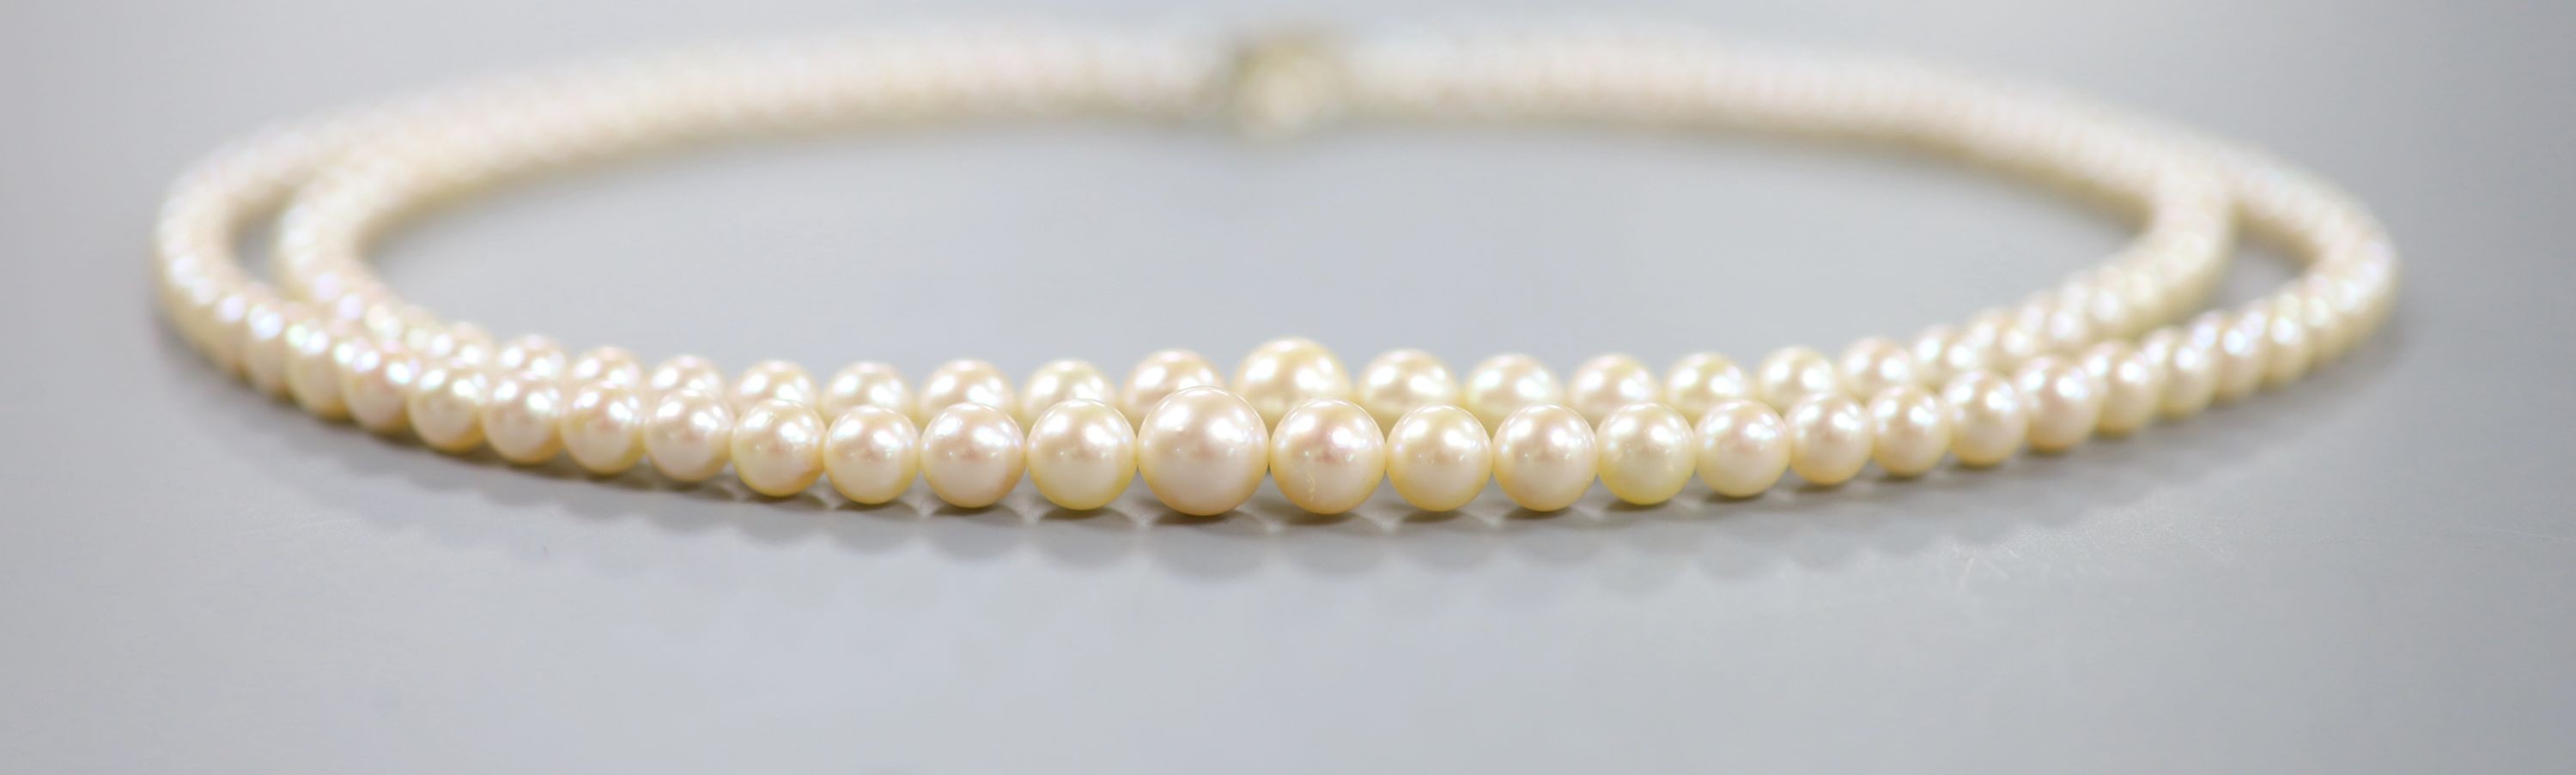 A double strand graduated cultured pearl necklace, with 9ct gold and cultured pearl set clasp, approx. 40cm.